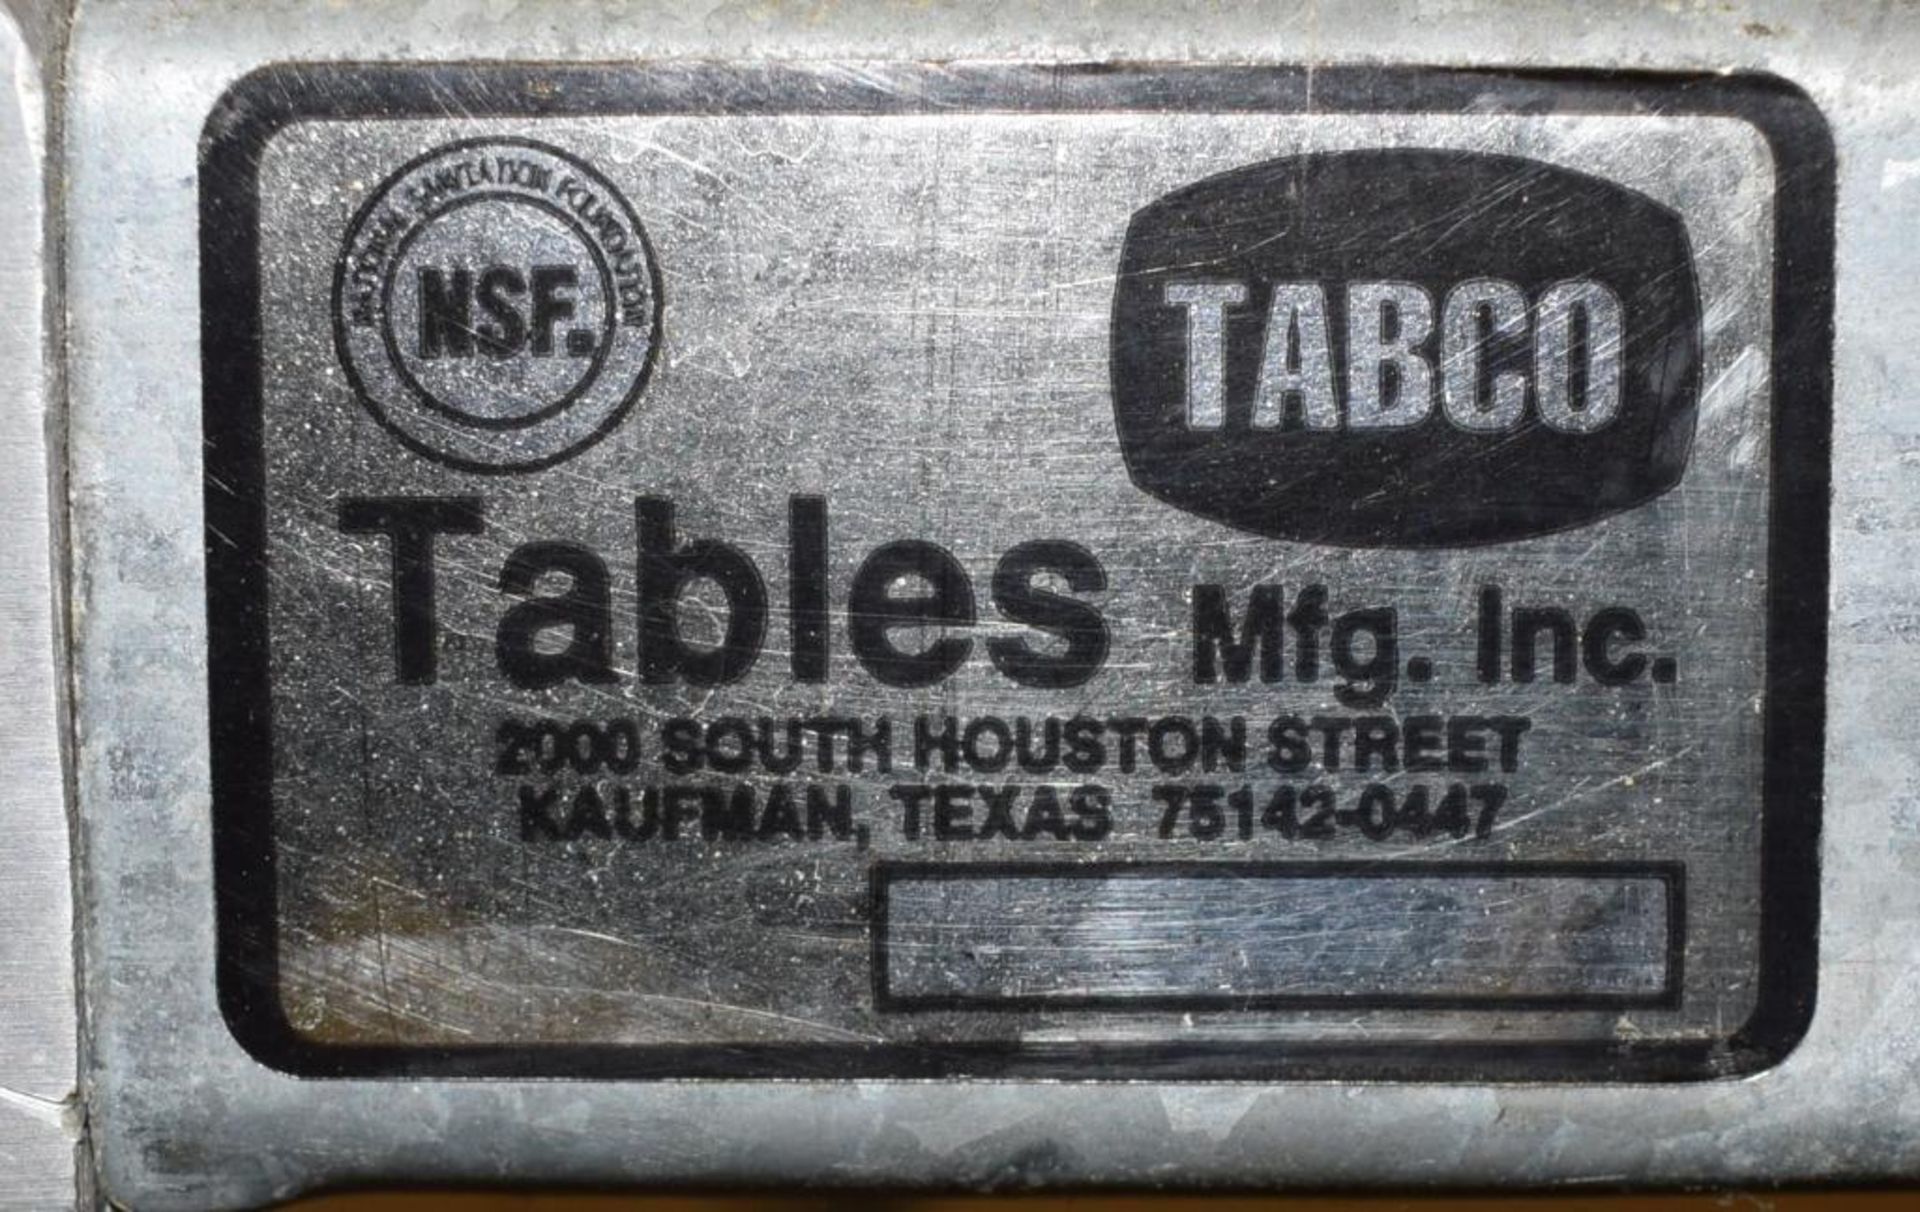 TABCO Stainless Steel Top Table. Approximate 30" wide x 48" long x 36" tall. With bottom shelf and ( - Image 5 of 5